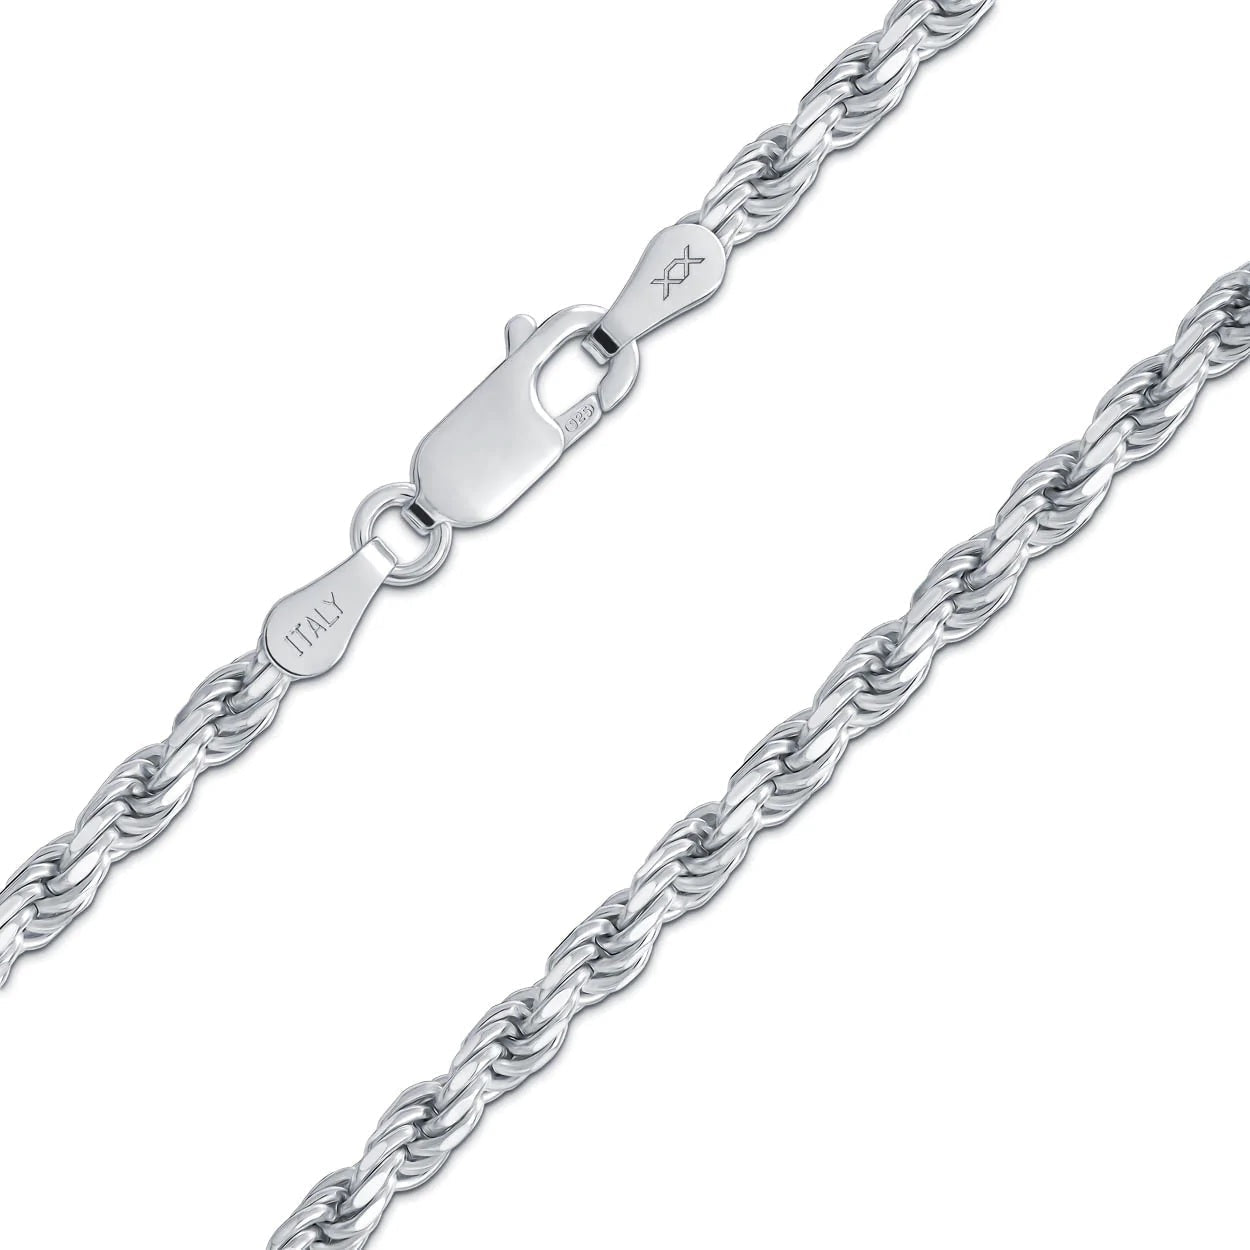 Better Jewelry 3.2mm Rope Diamond cut Chain Necklace .925 Sterling Silver w. Rhodium plate